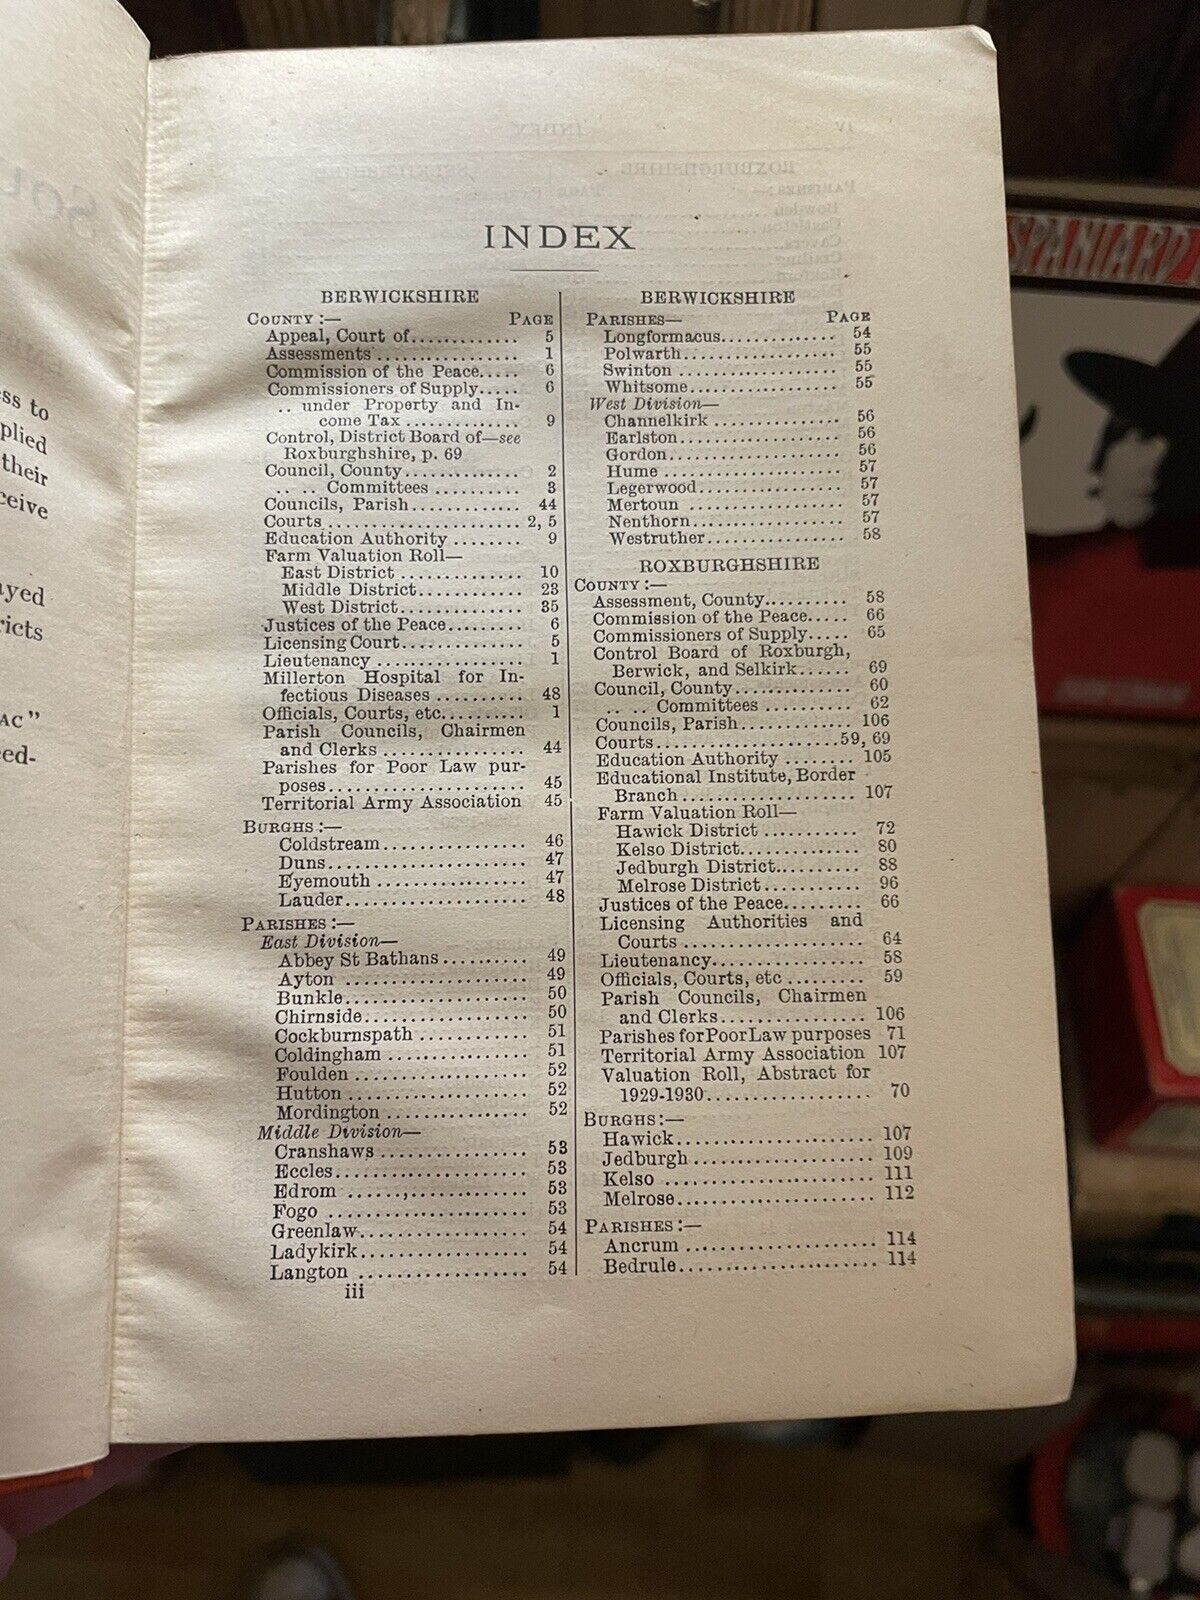 A New Almanac for the Southern Counties of Scotland for 1930